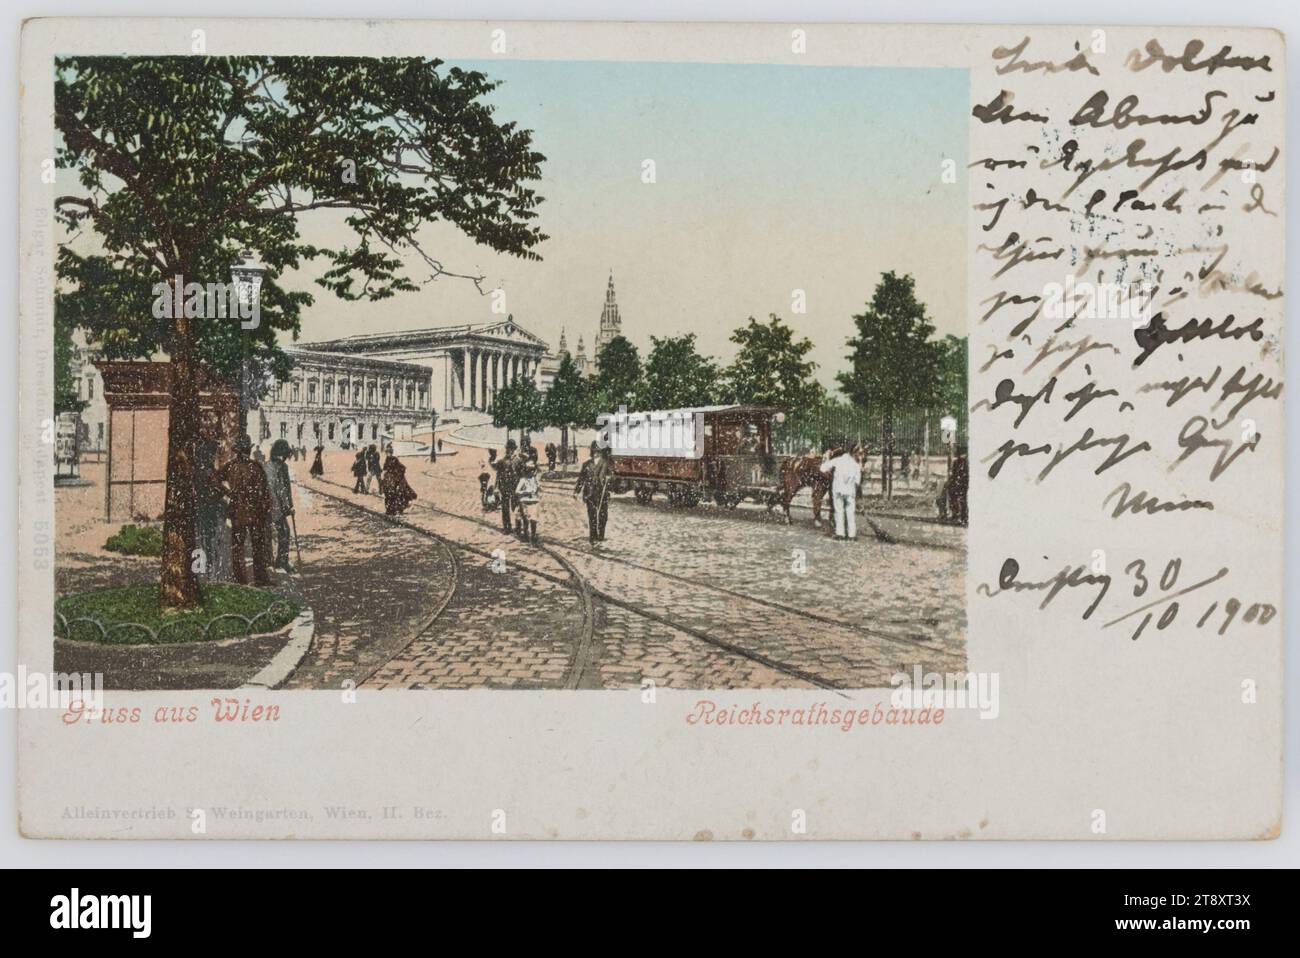 Greeting from Vienna. Reichsrathsgebäude, Edgar Schmidt, Producer, Sigmund Weingarten, Producer, 1900, coated paperboard, photochrom, Inscription, FROM, Vienna, TO, Wien Döbling, ADDRESS, Wohlg. Fräu. -Cottage Gasse 46, Döbling, Villa Dolfi, MESSAGE, Dear [Dol], Returned in the evening I found the l. card in the door, Glad [me?] to [see? say?] you, Thank God that nothing is missing to him, cordially. Greetings [M], Tuesday 30, 10 1900, Attractions, Ringstrasse, Law and Justice, Media and Communication, Postcards with transliteration, 1st District: Innere Stadt, diligence, omnibus Stock Photo